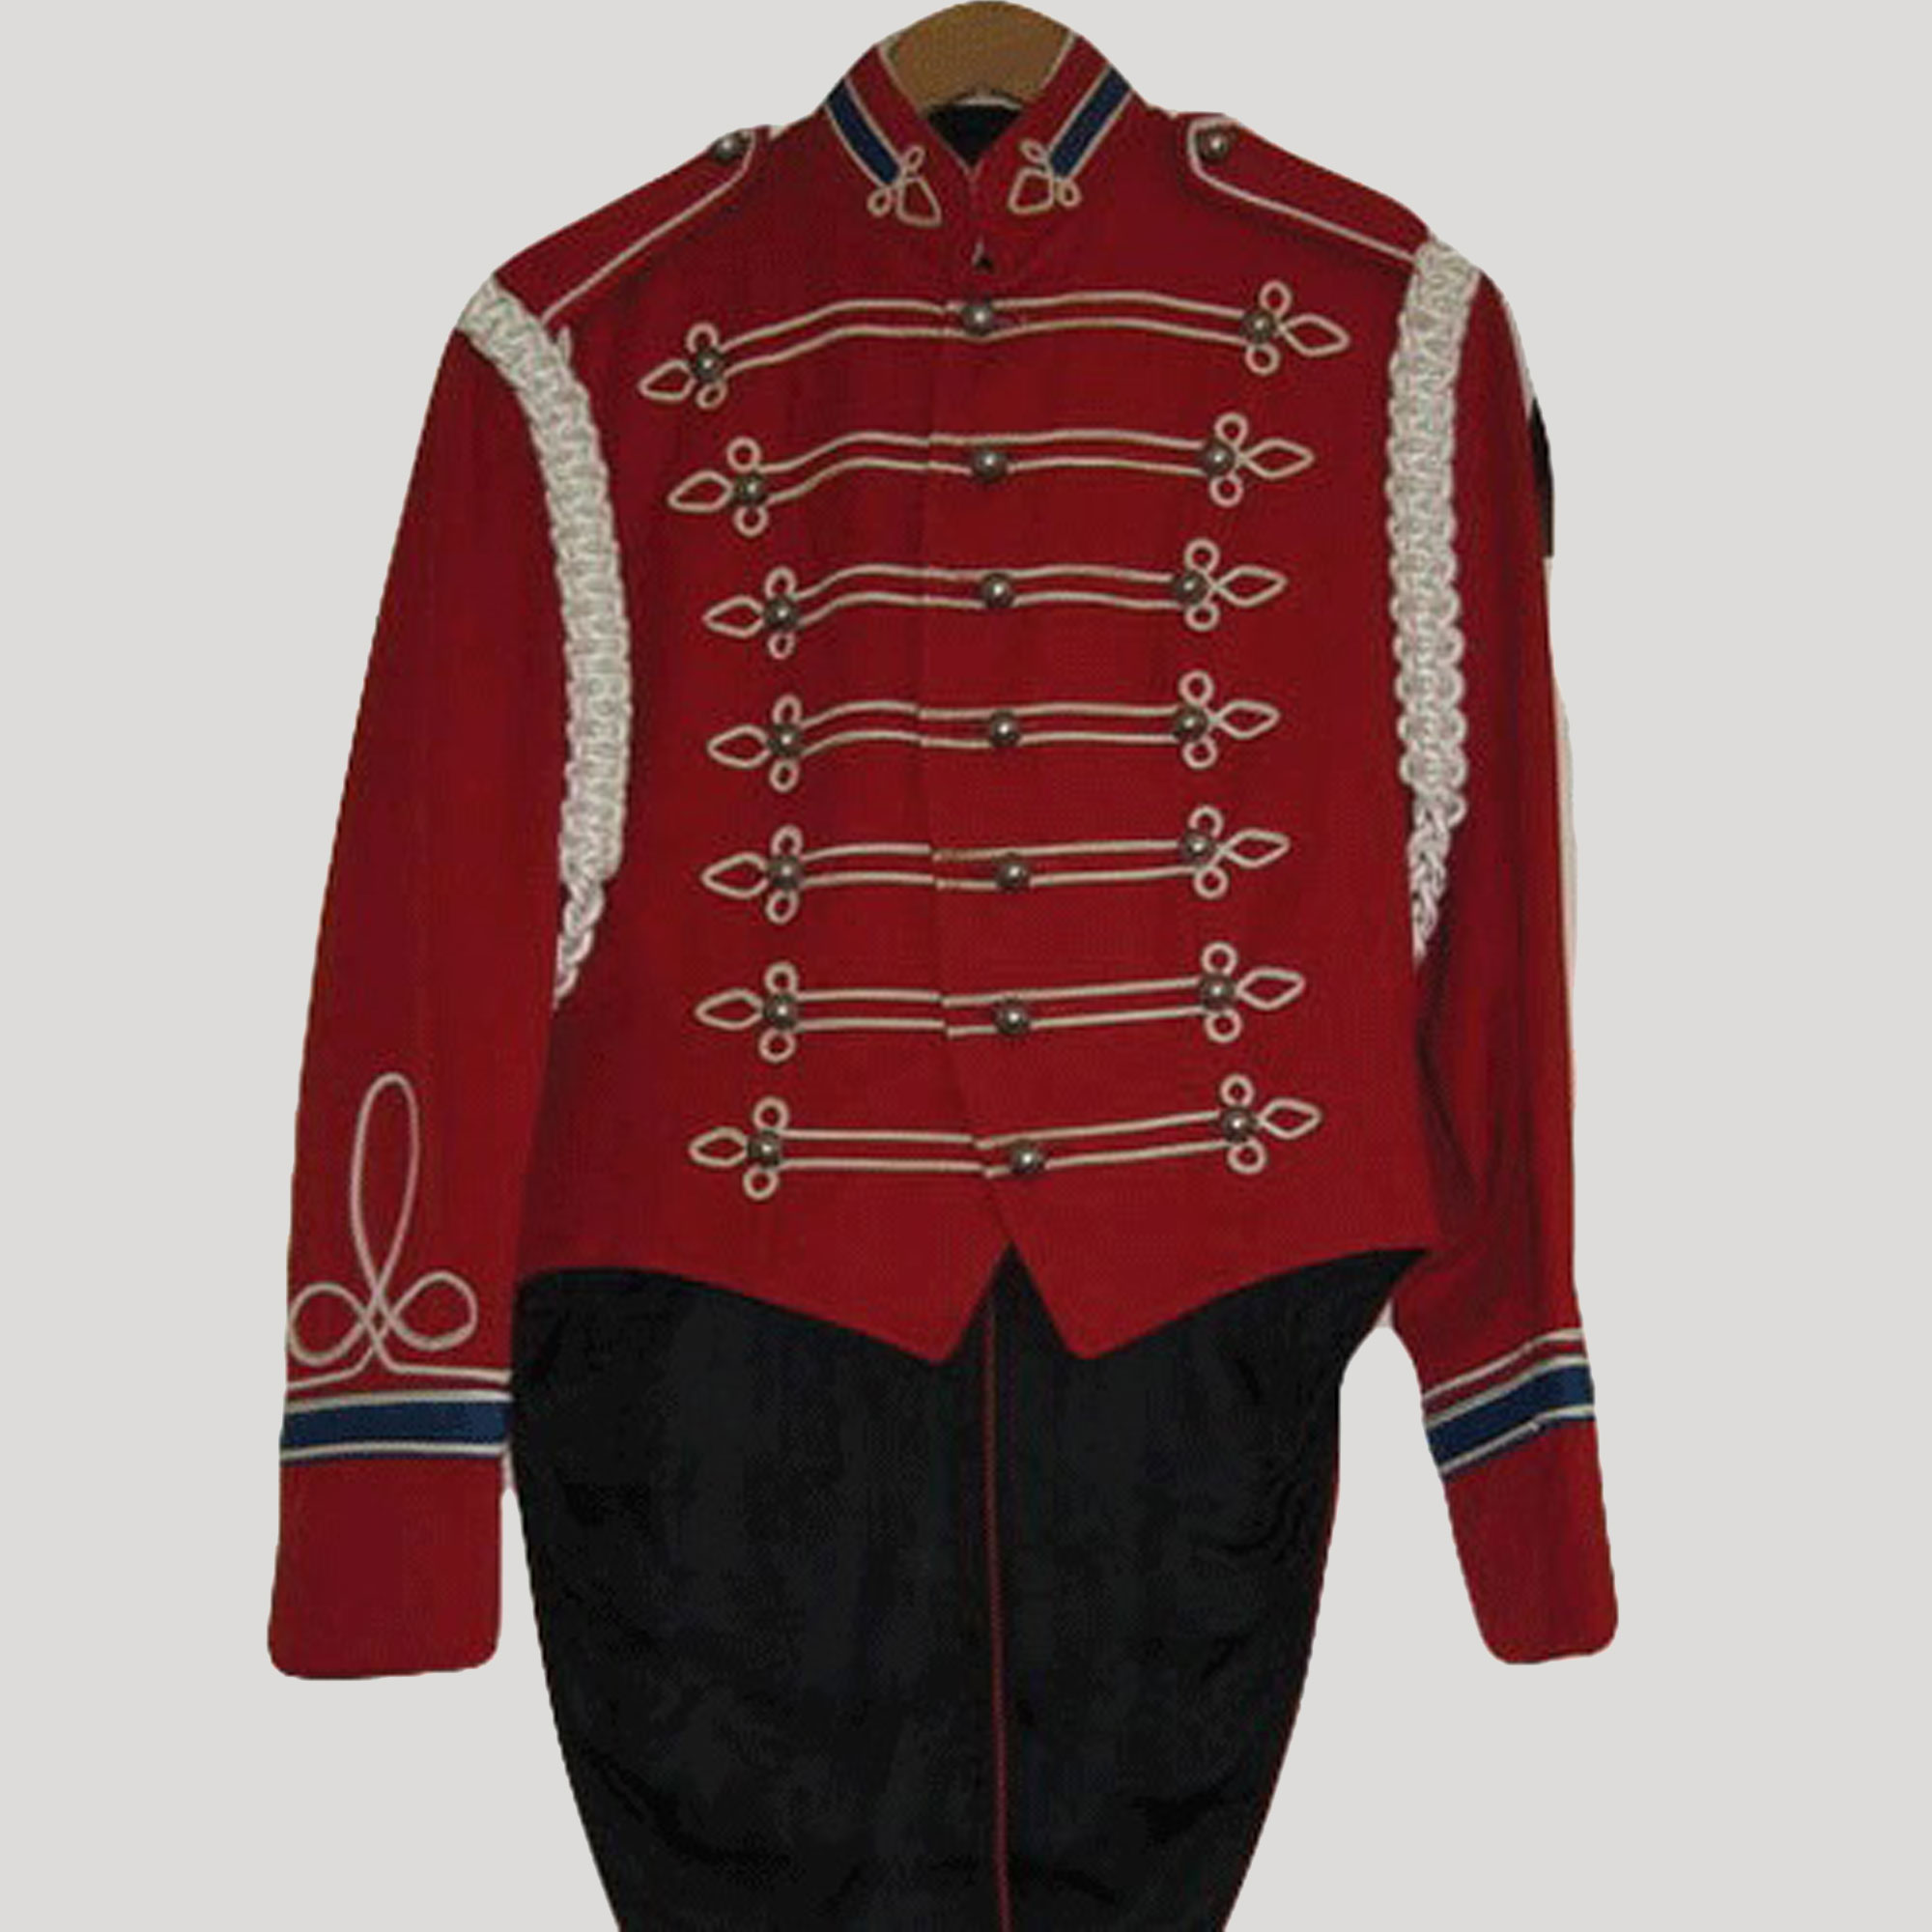 New Marching Band Golden Braid Men's Red Wool Military Jacket